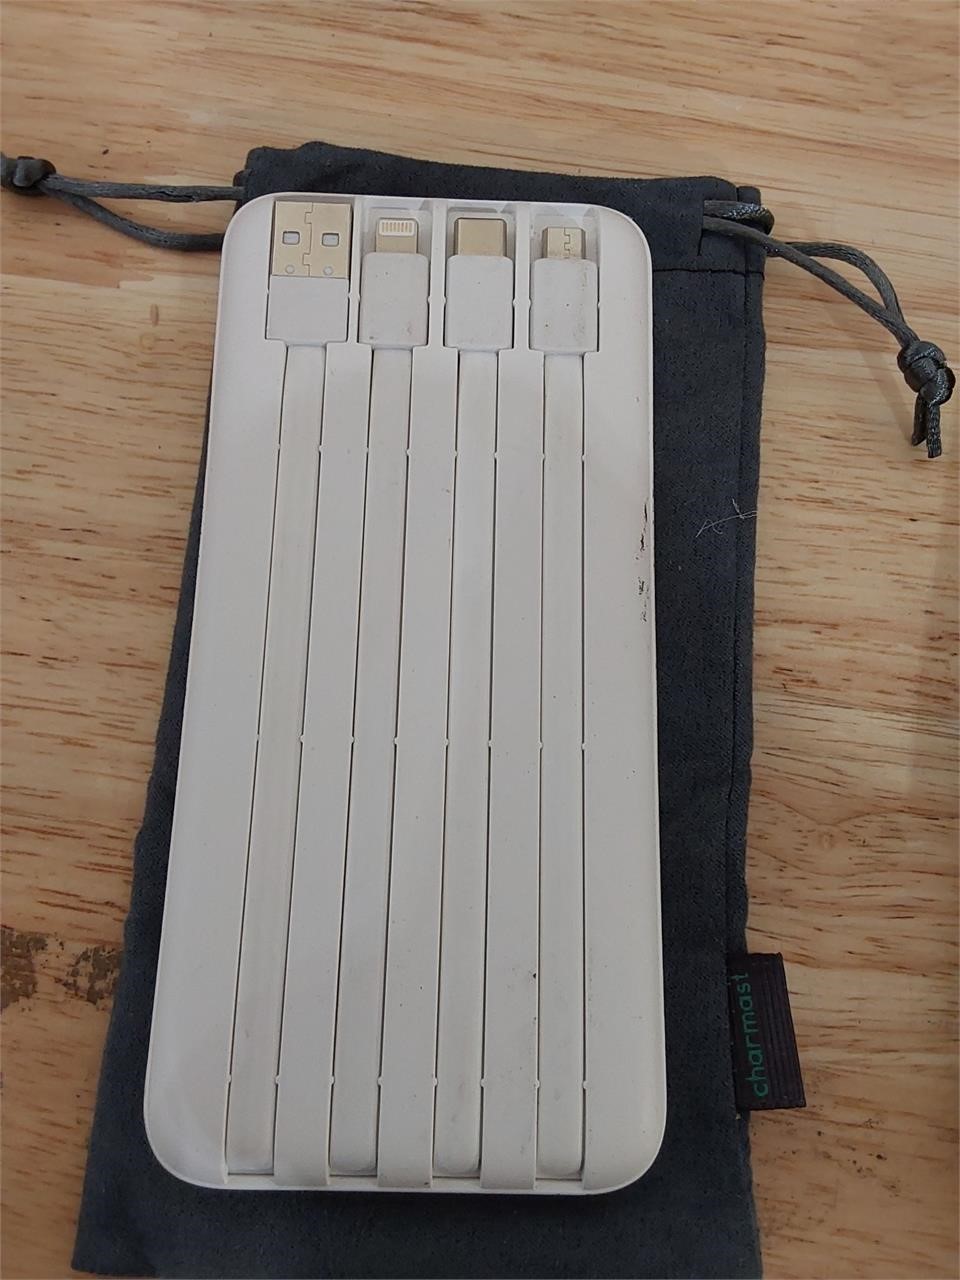 Portable Powerbank with Built In Charger Cords